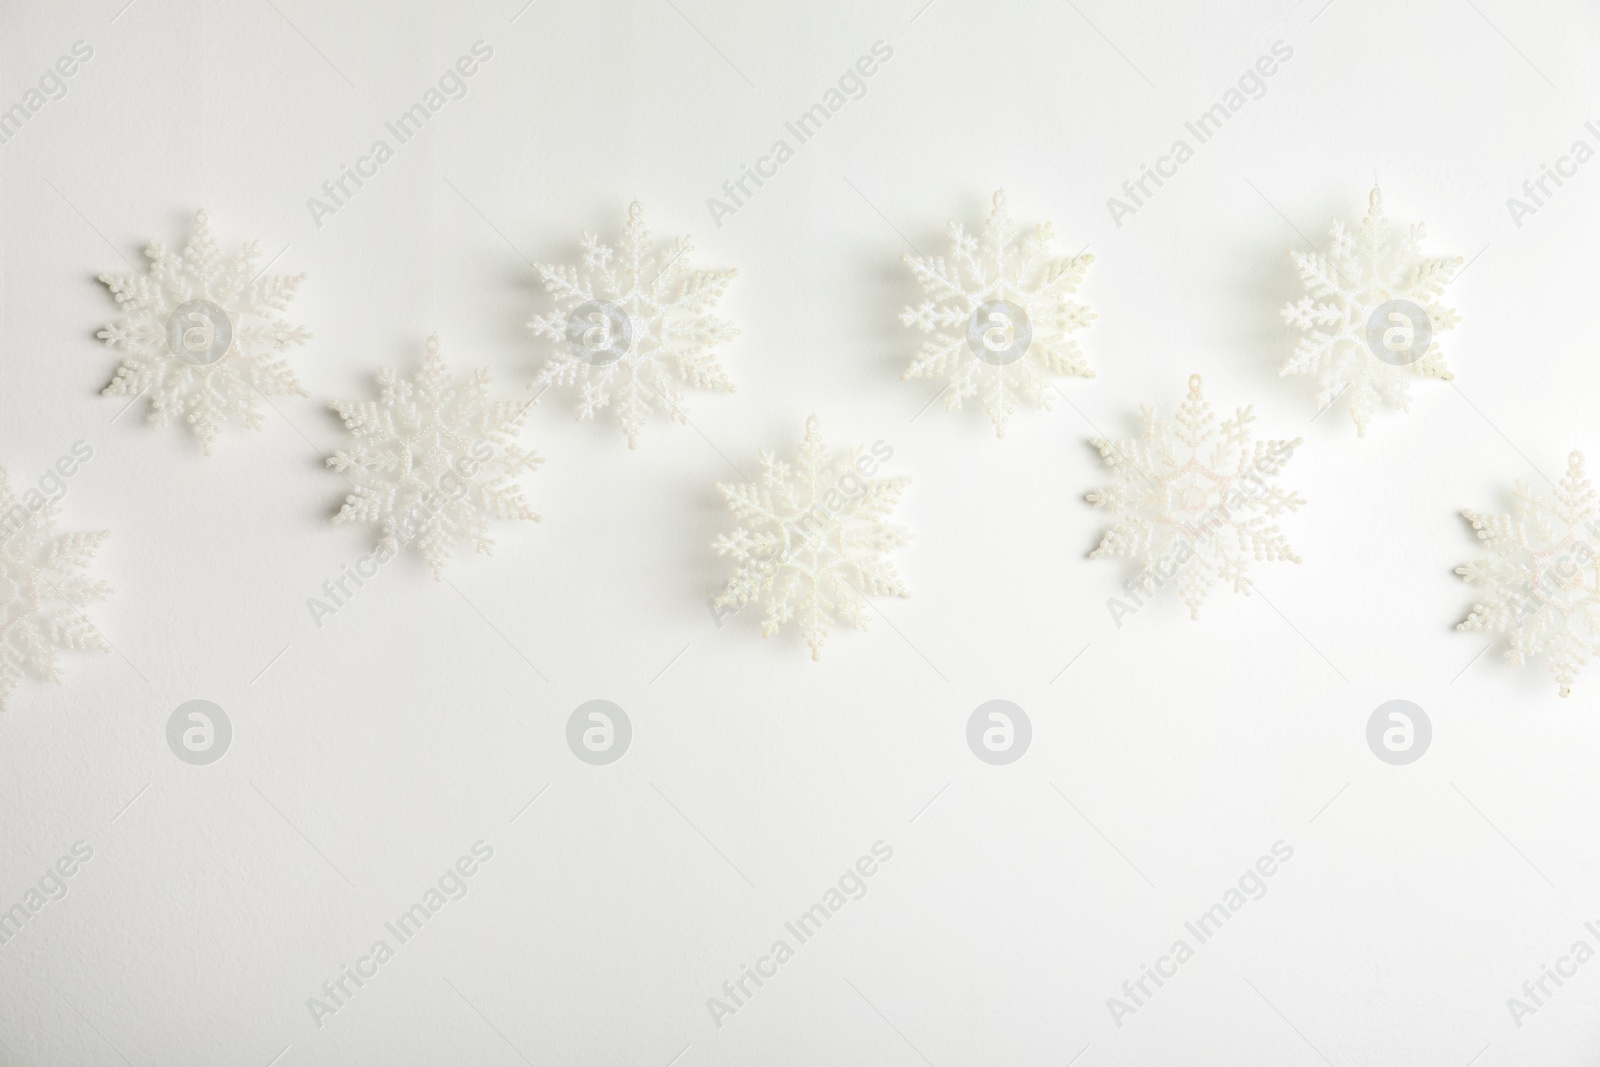 Photo of Beautiful decorative snowflakes hanging on white background, space for text